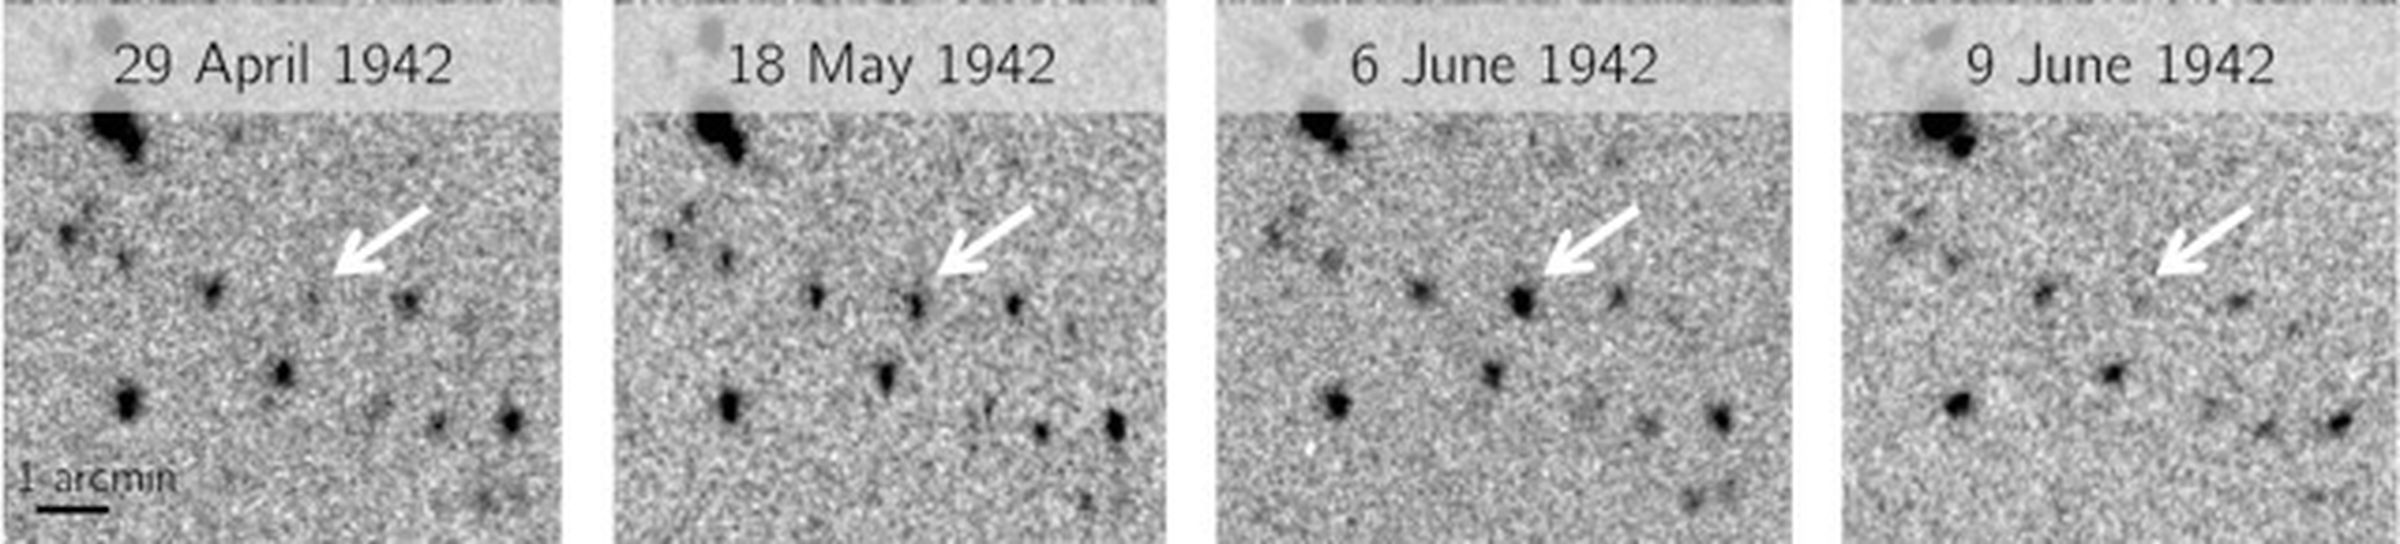 These images from 1942 show the star system going through a dwarf nova eruption